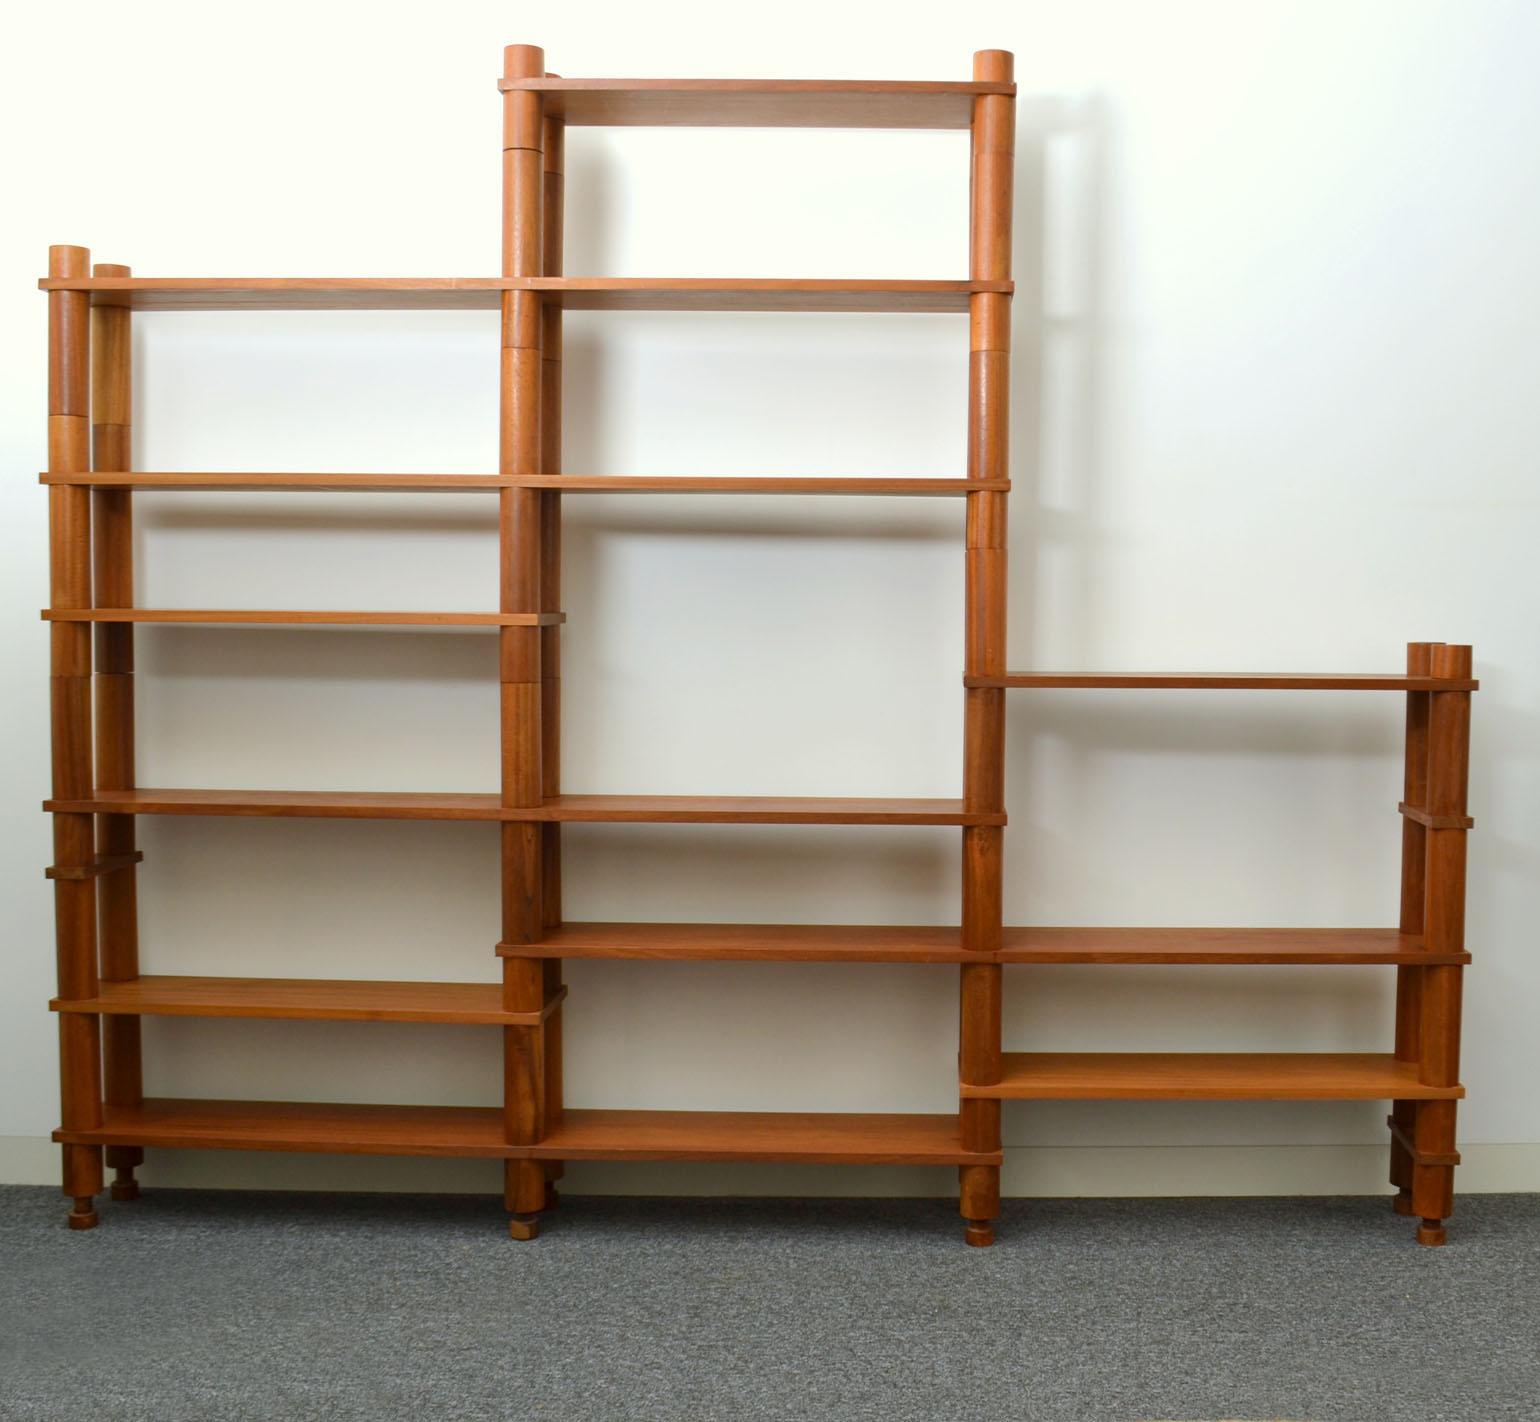 The free standing flexible modular shelving system was constructed in solid teak. The system is solely made from two sizes of cylindrical wooden uprights and connecting screw elements. The shelves large and small have four or six holes that are